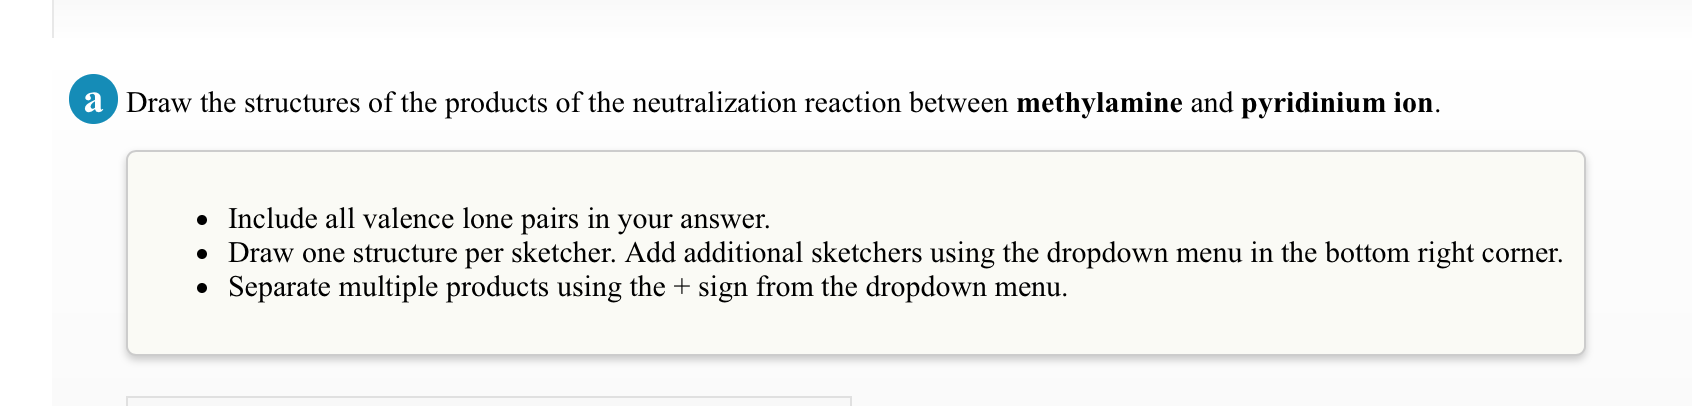 What are the products of a neutralization reaction?